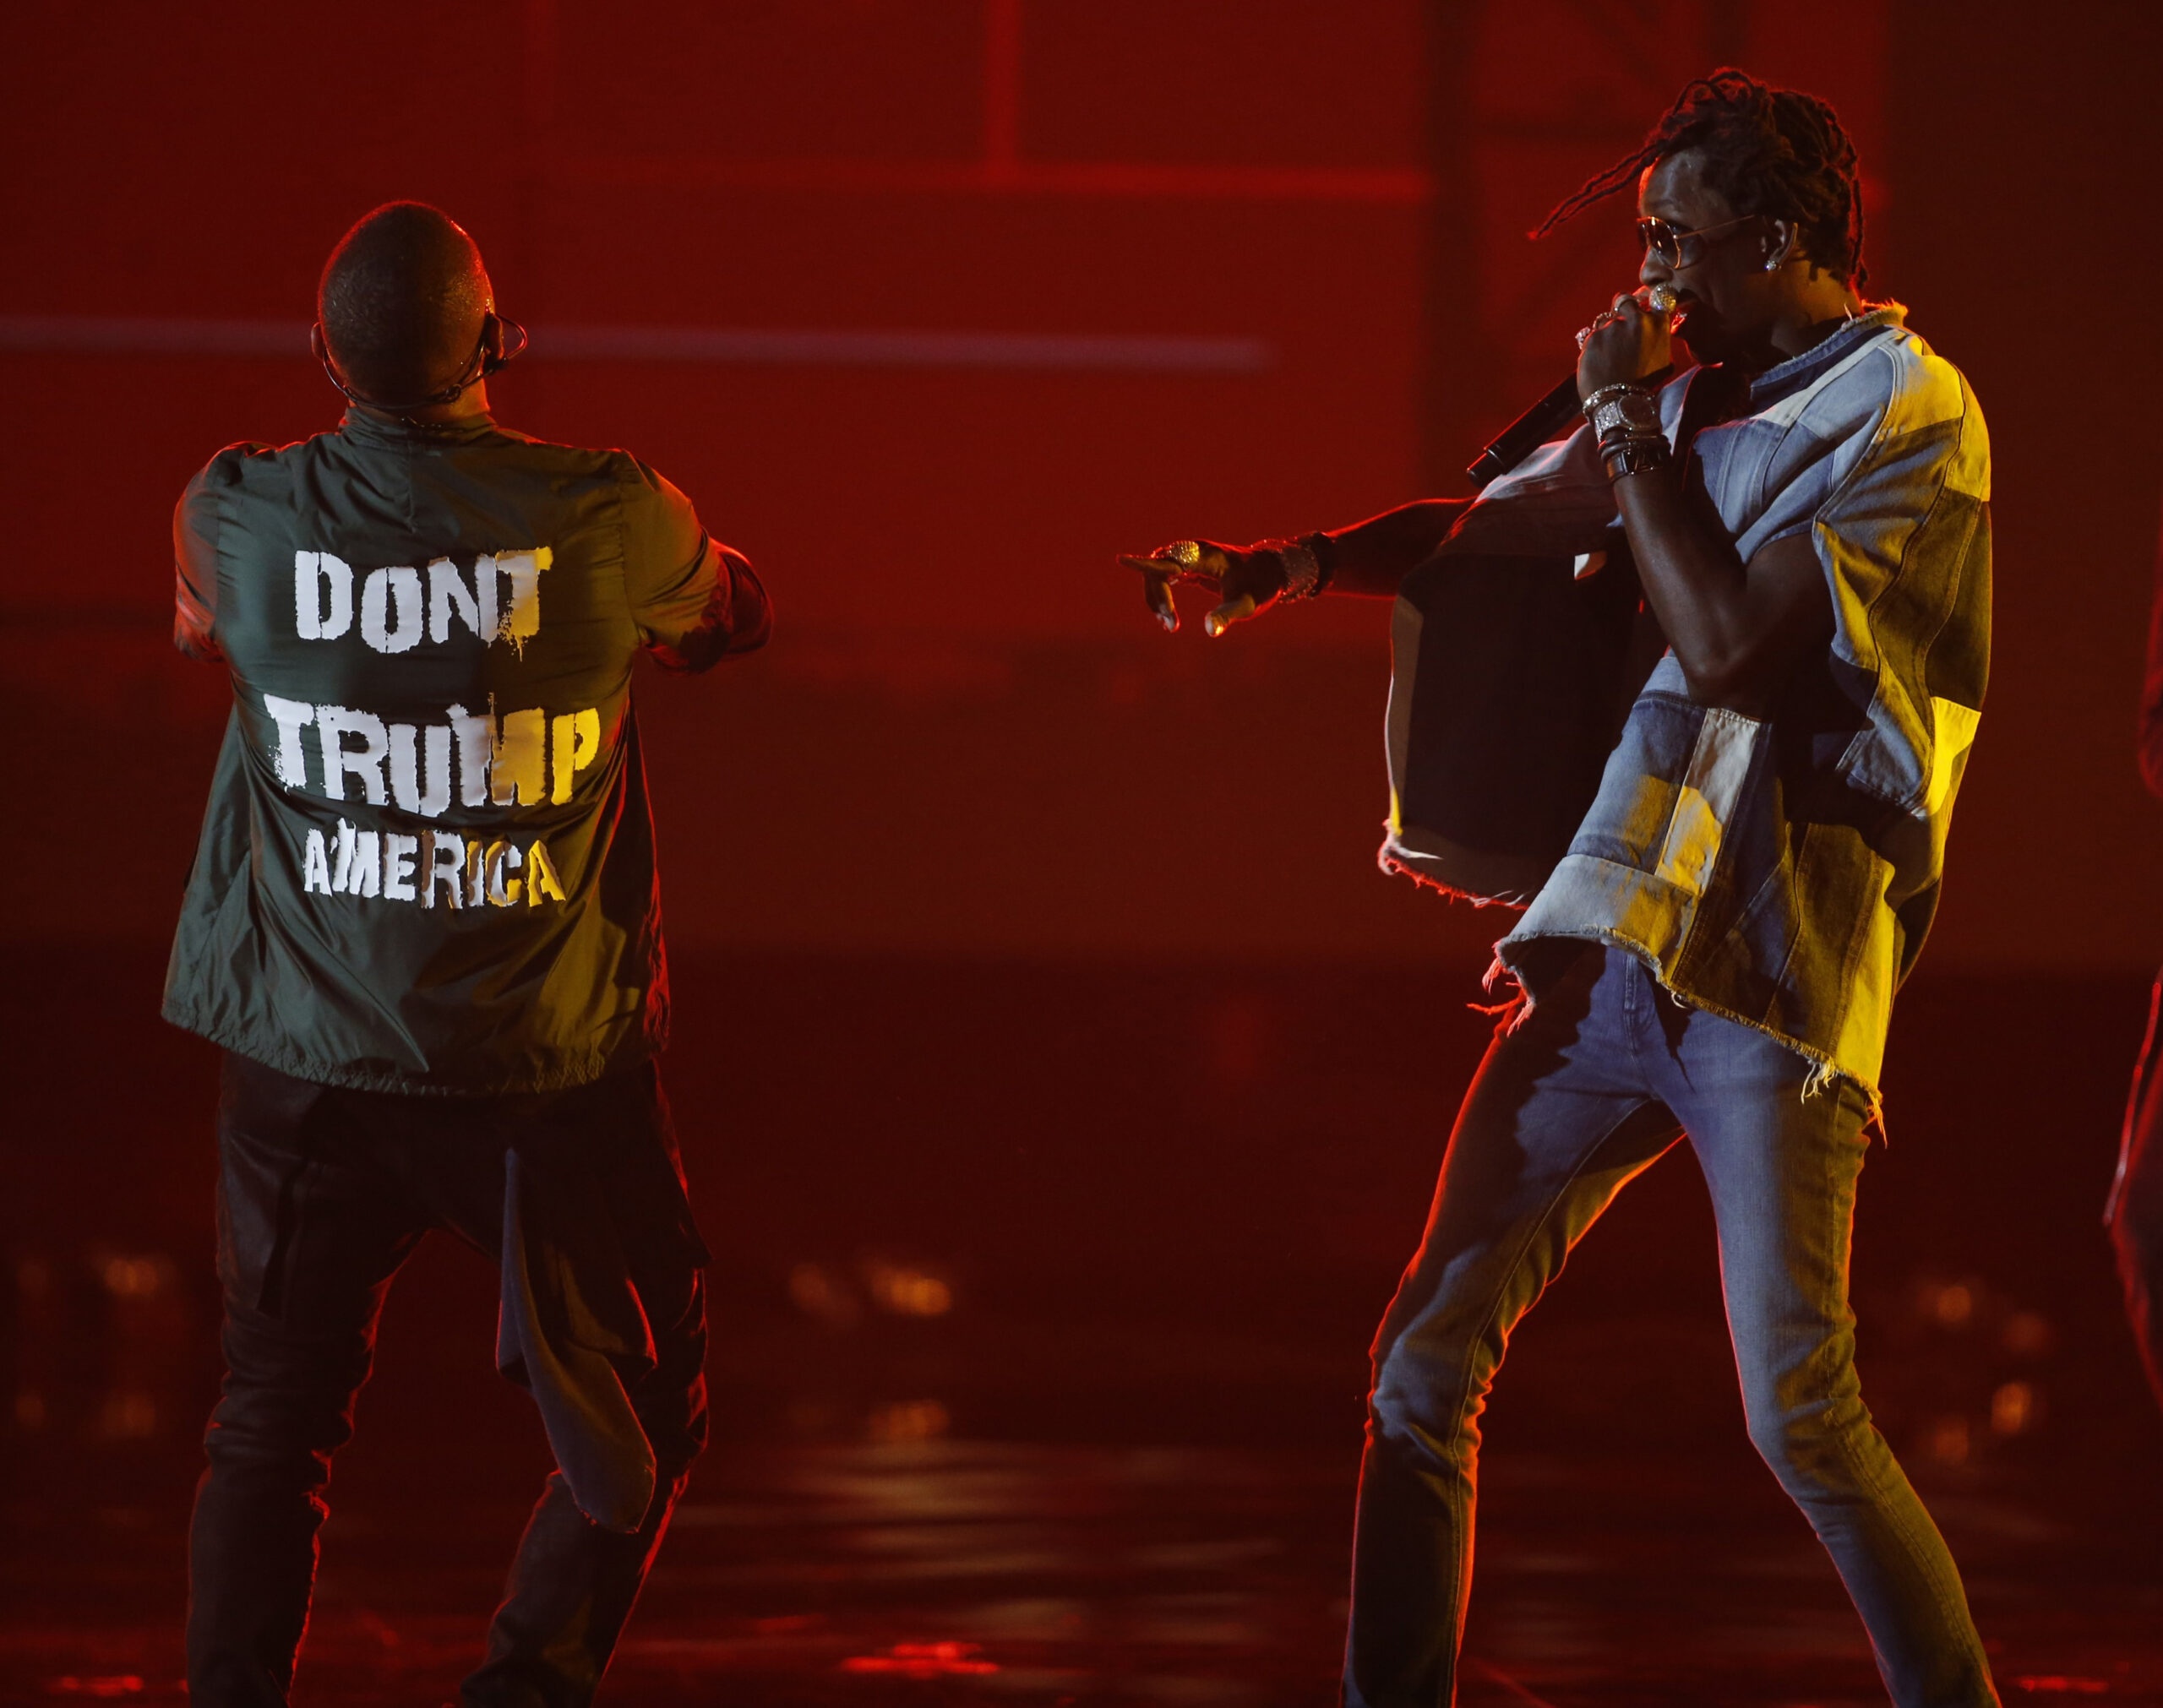 Young Thug performs "No Limit" with Usher at the 2016 BET Awards in Los Angeles